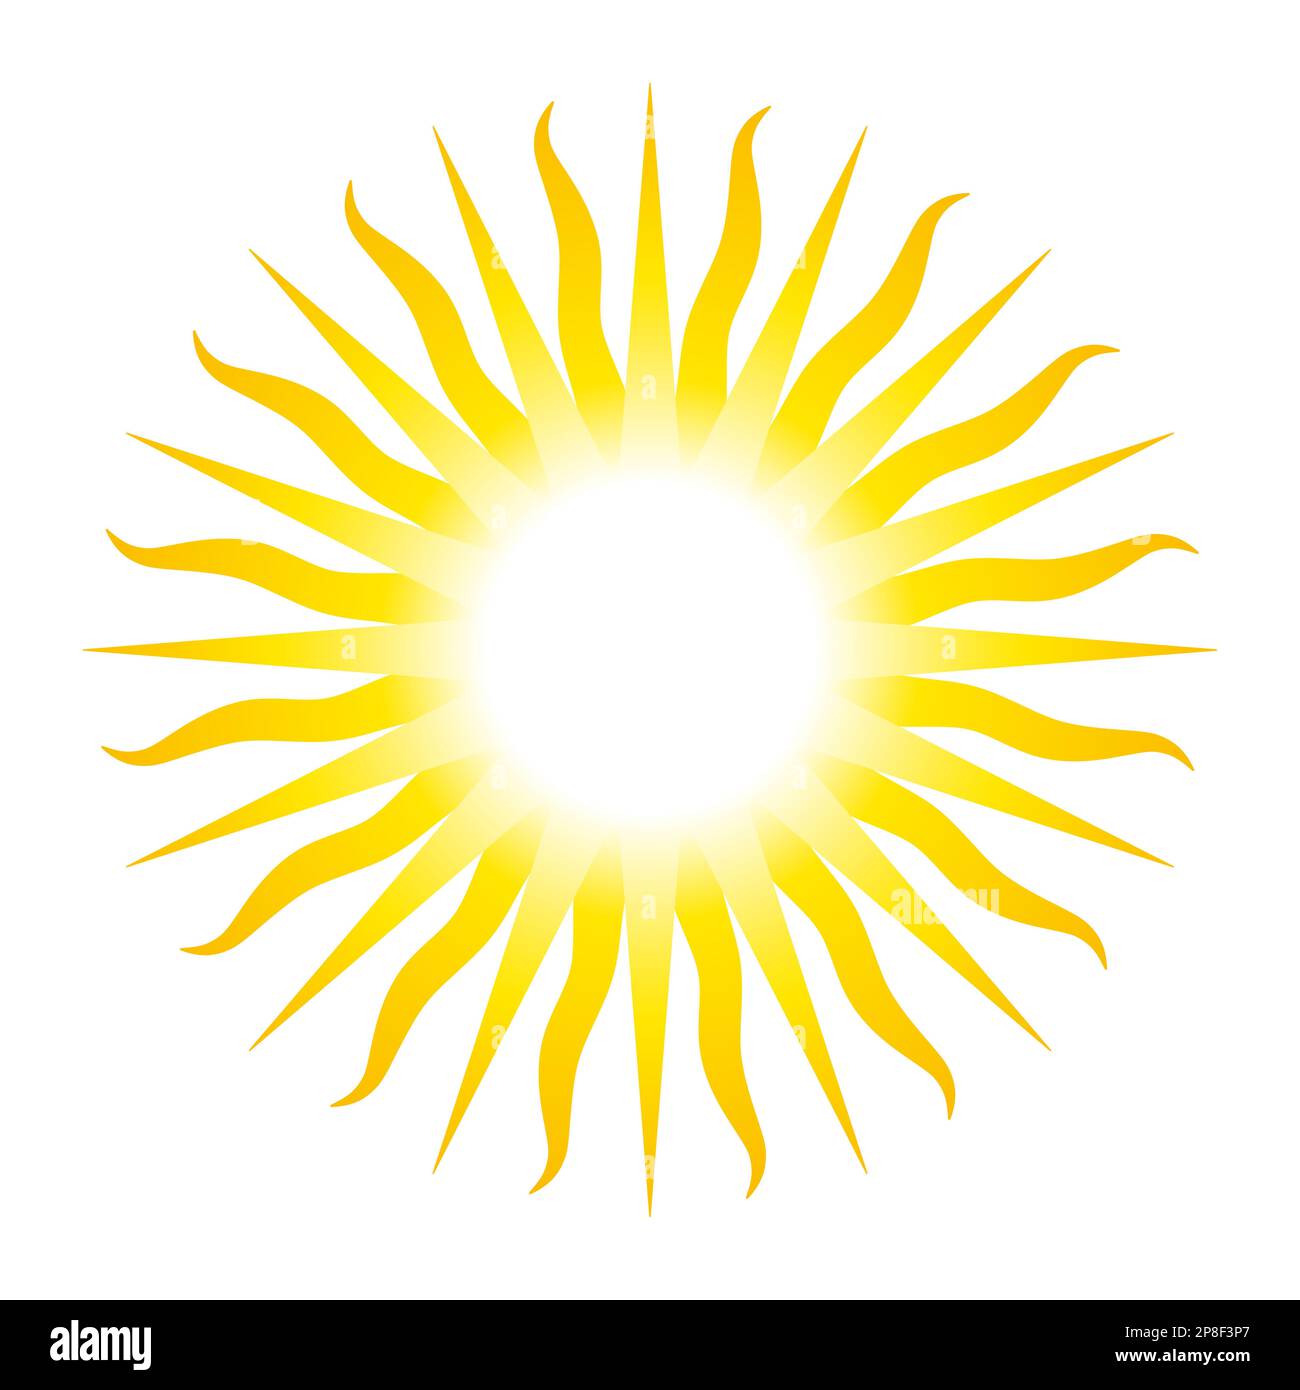 Sun symbol with thirty two rays, analogue to the Sun of May, national emblem of Argentina and Uruguay. Radiant golden yellow solar disk. Stock Photo